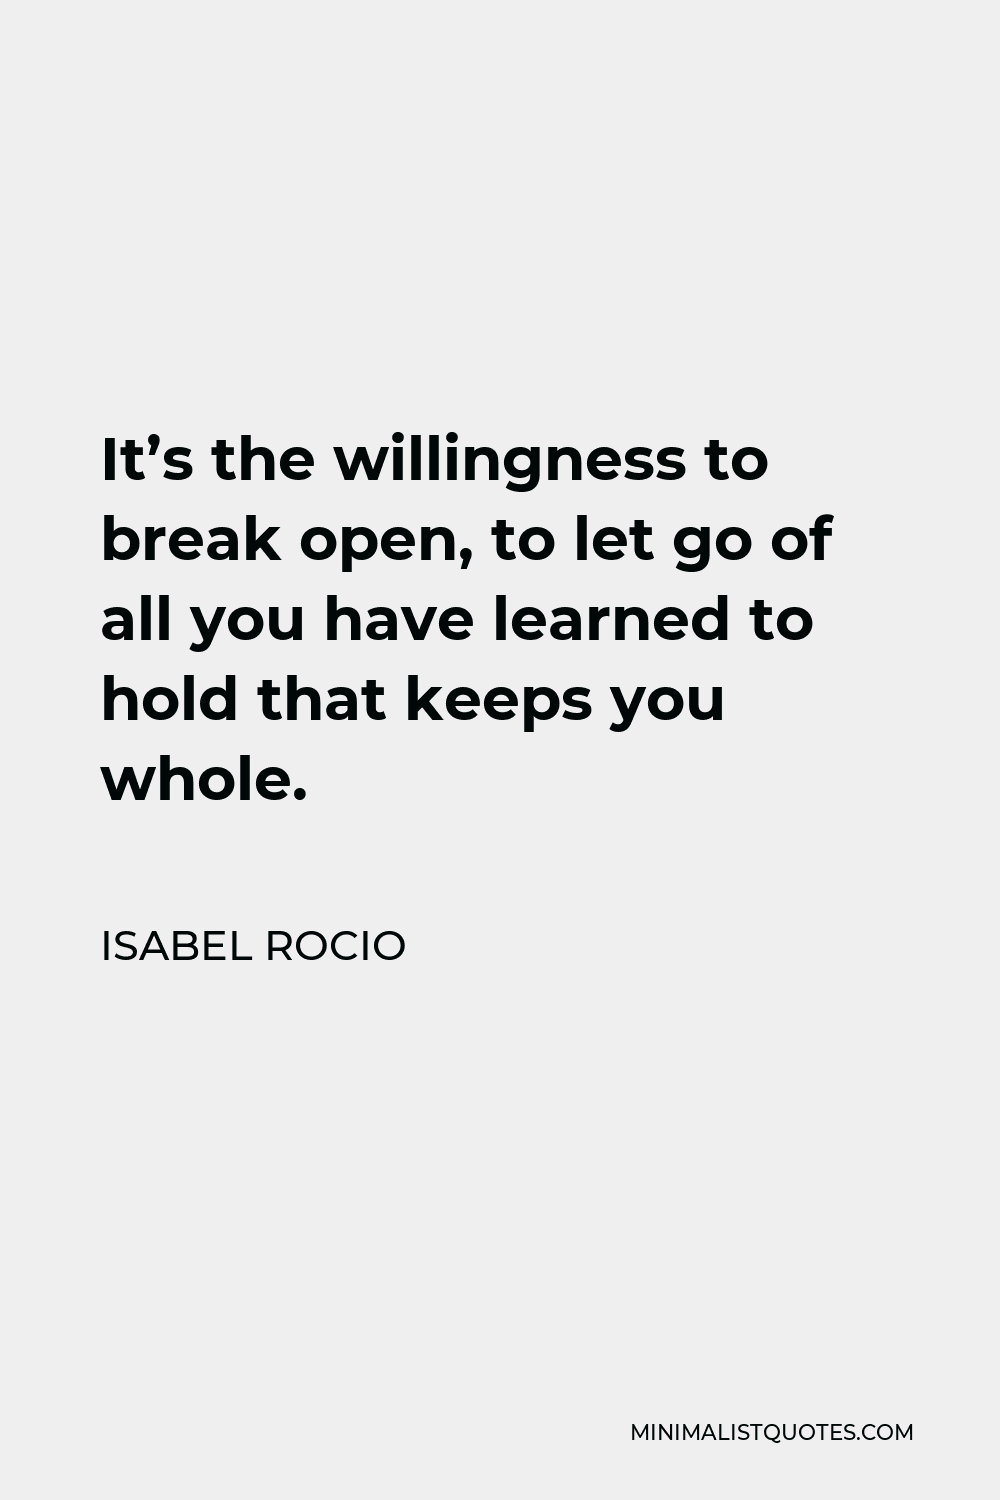 Isabel Rocio Quote - It’s the willingness to break open, to let go of all you have learned to hold that keeps you whole.